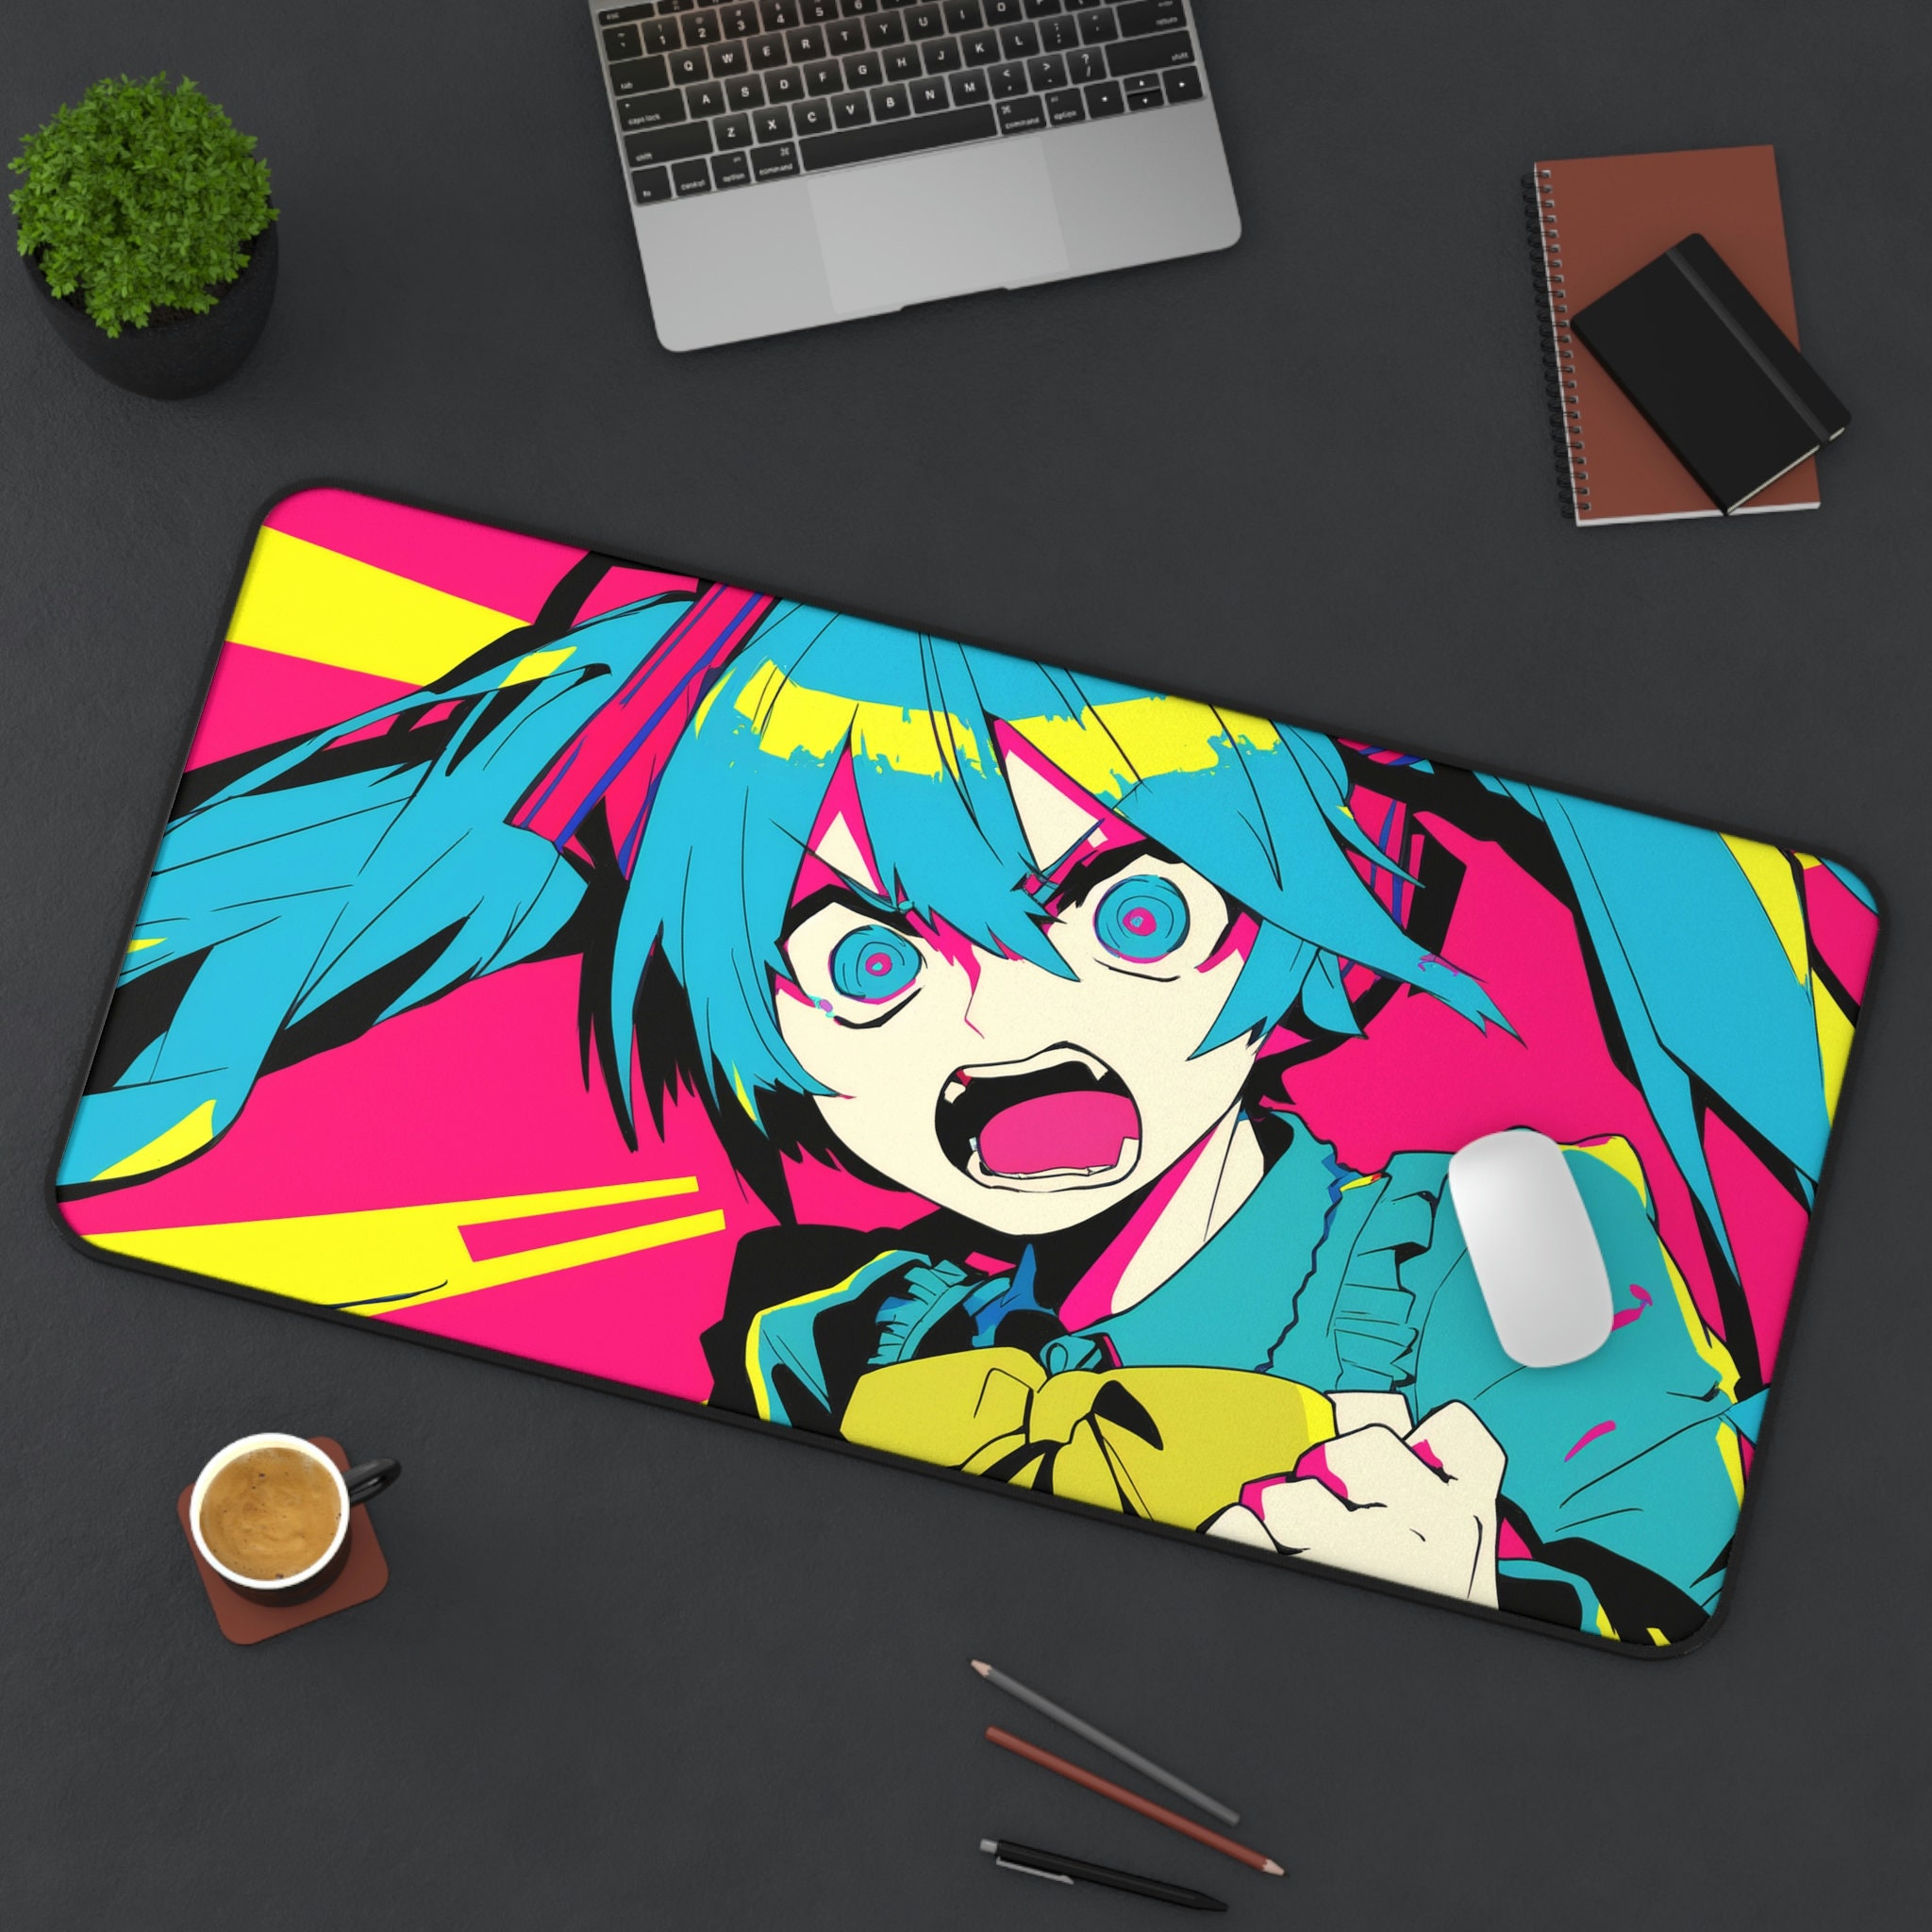 Anime Mouse pad Large Gaming Mouse Pad Desk Pad Keyboard Mat with Stitched  Edgesfor Work  Gaming Office  Home 315x118inch  Amazonca  Electronics